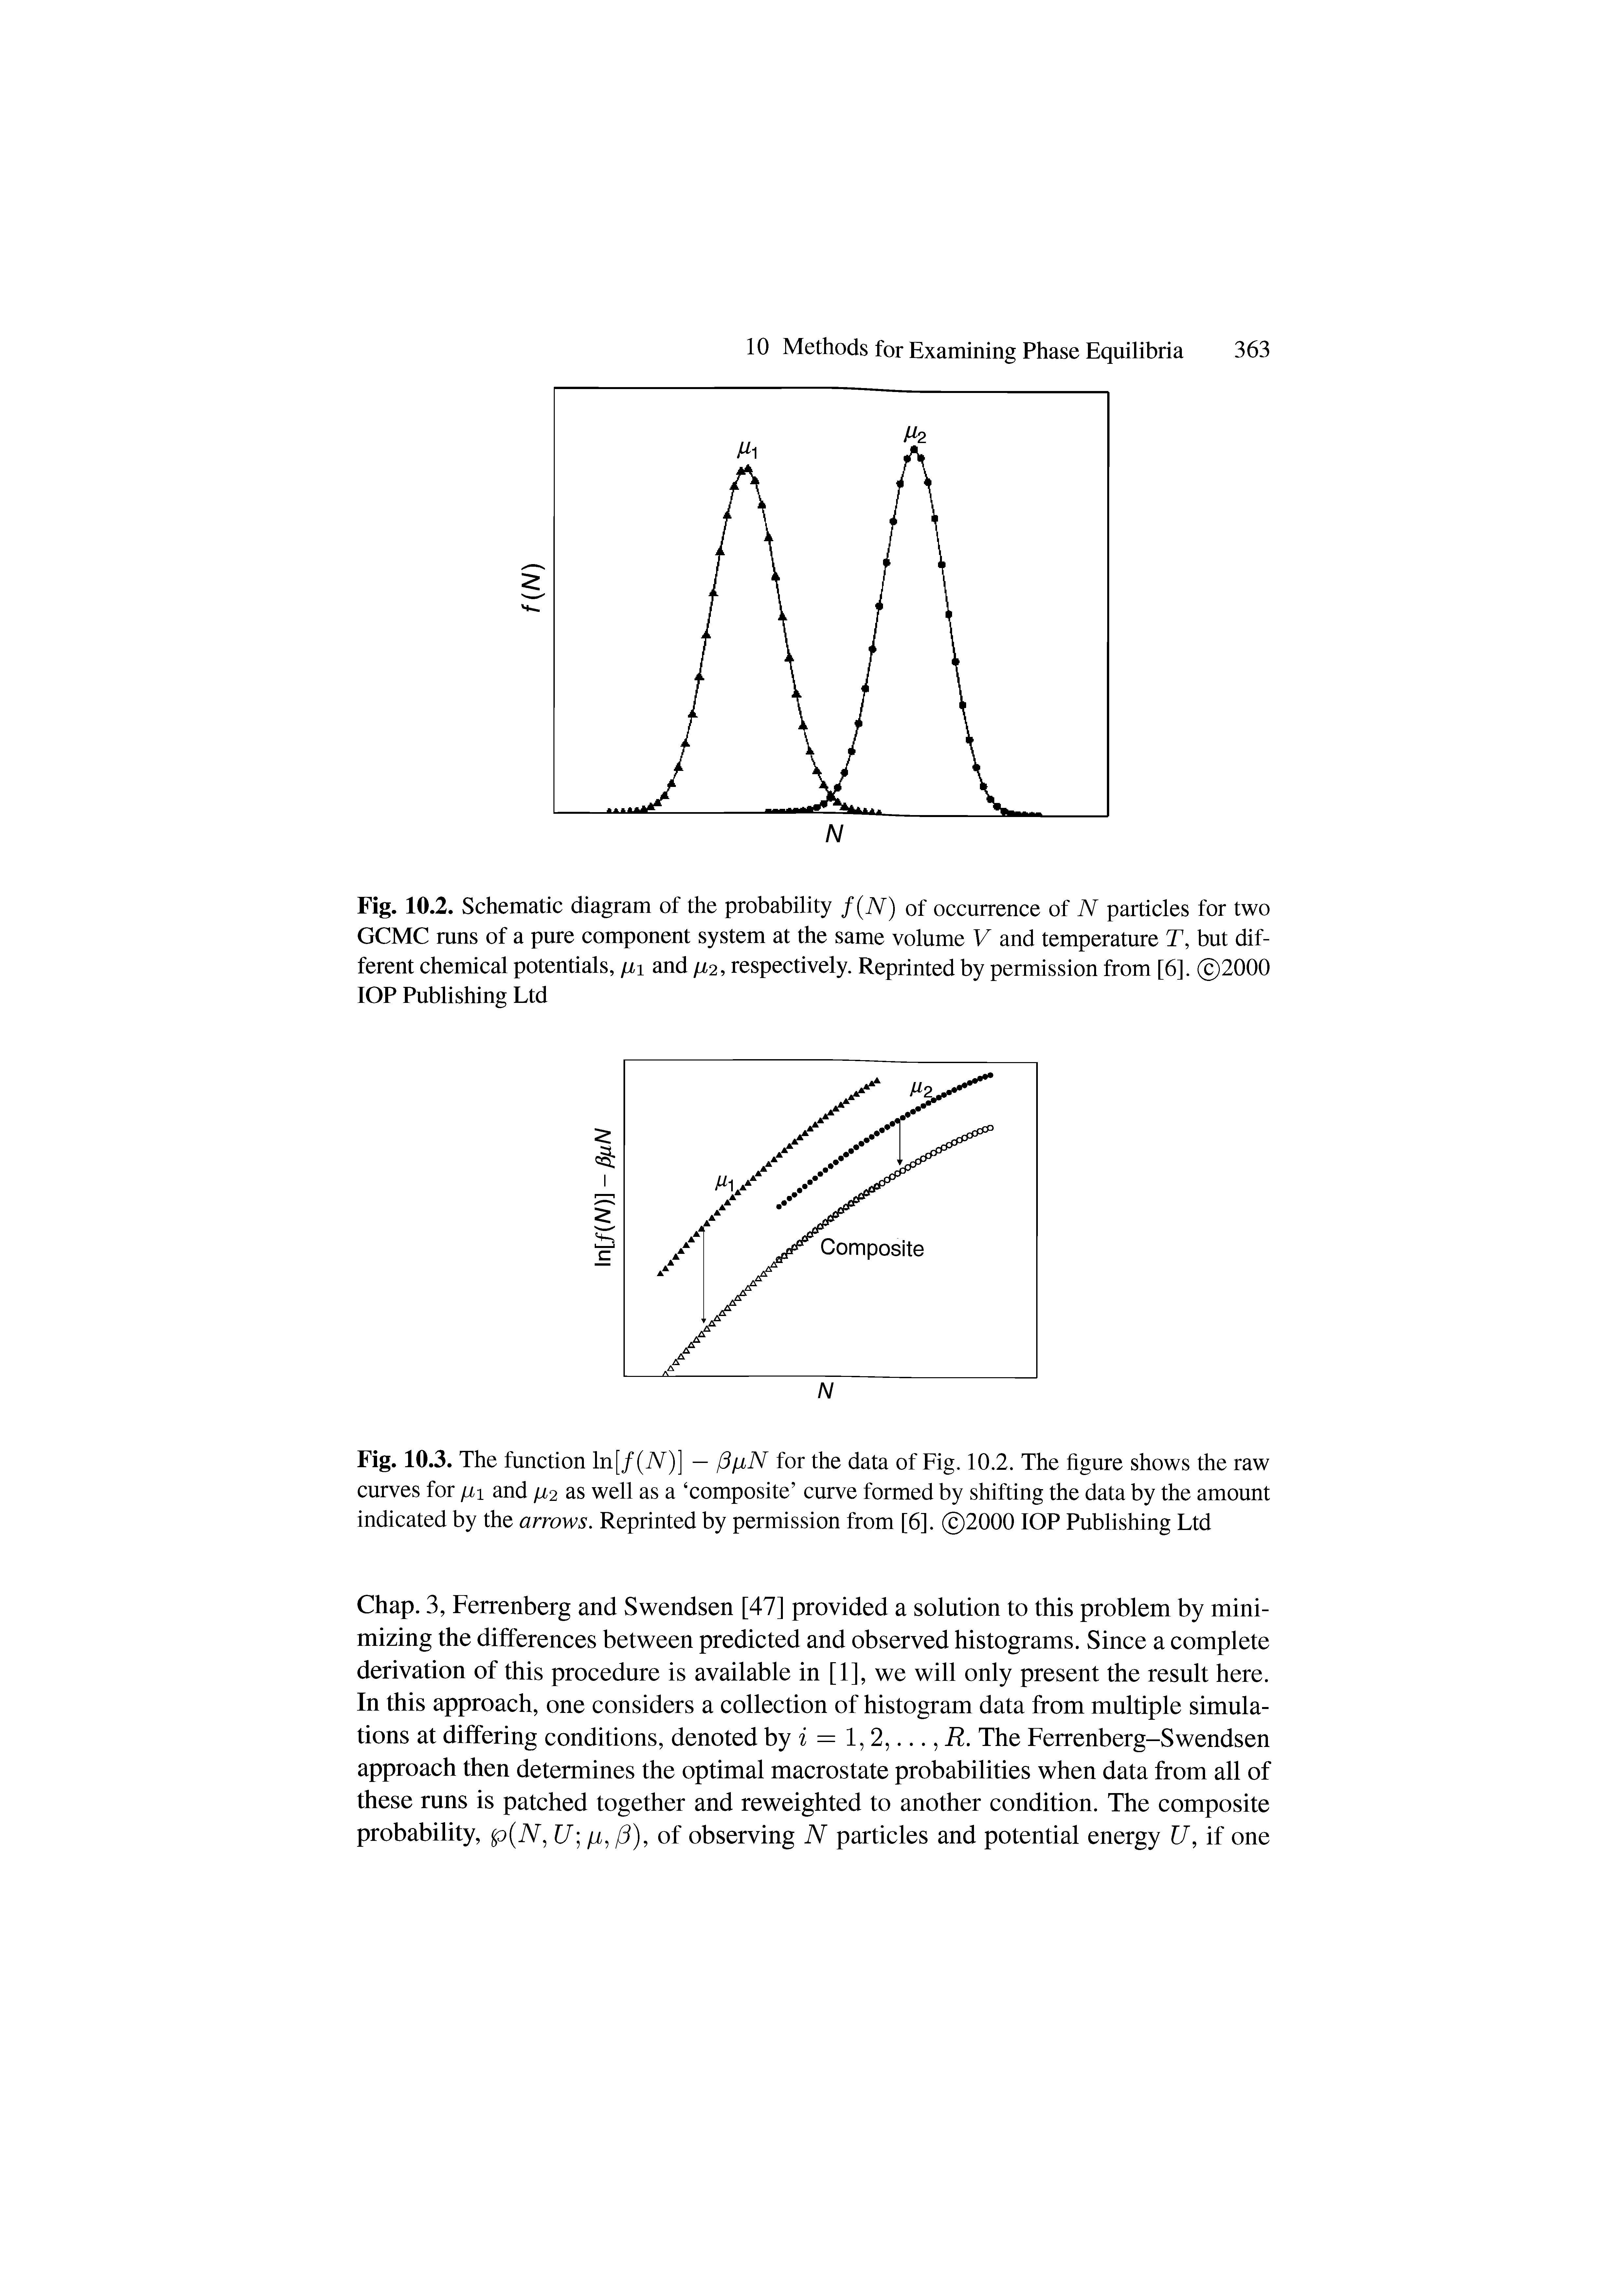 Fig. 10.2. Schematic diagram of the probability f(N) of occurrence of N particles for two GCMC runs of a pure component system at the same volume V and temperature T, but different chemical potentials, ji and (i2, respectively. Reprinted by permission from [6]. 2000 IOP Publishing Ltd...